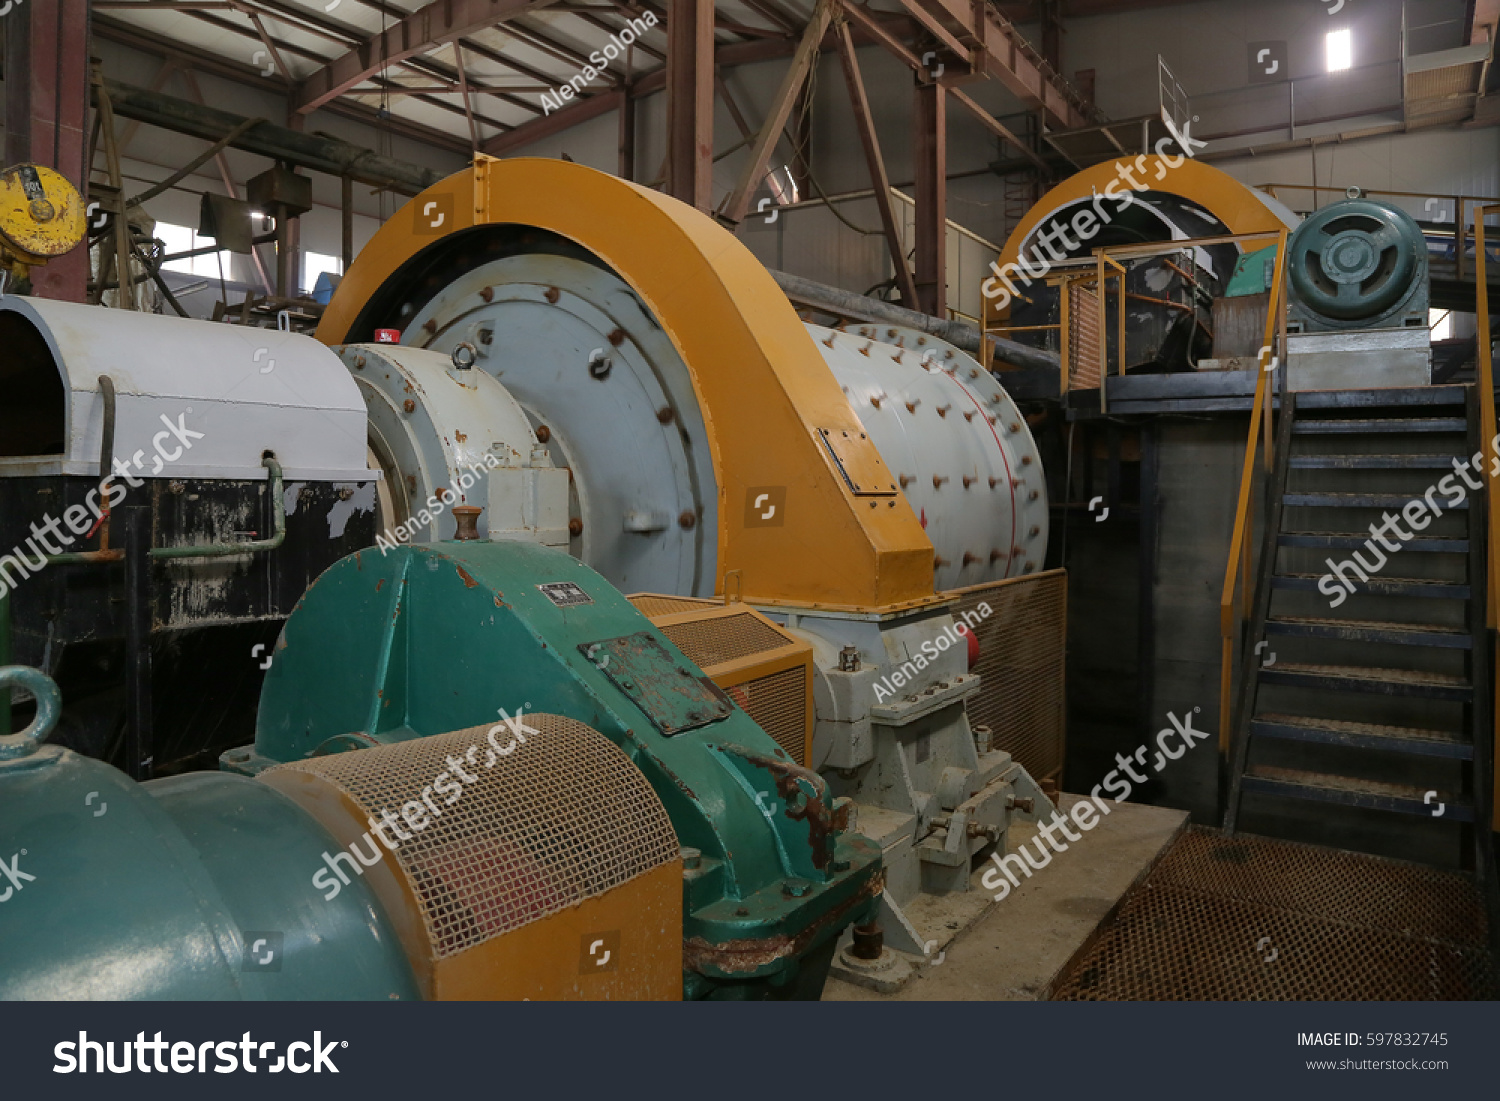 Gold mining. Industrial factory. Equipment #597832745